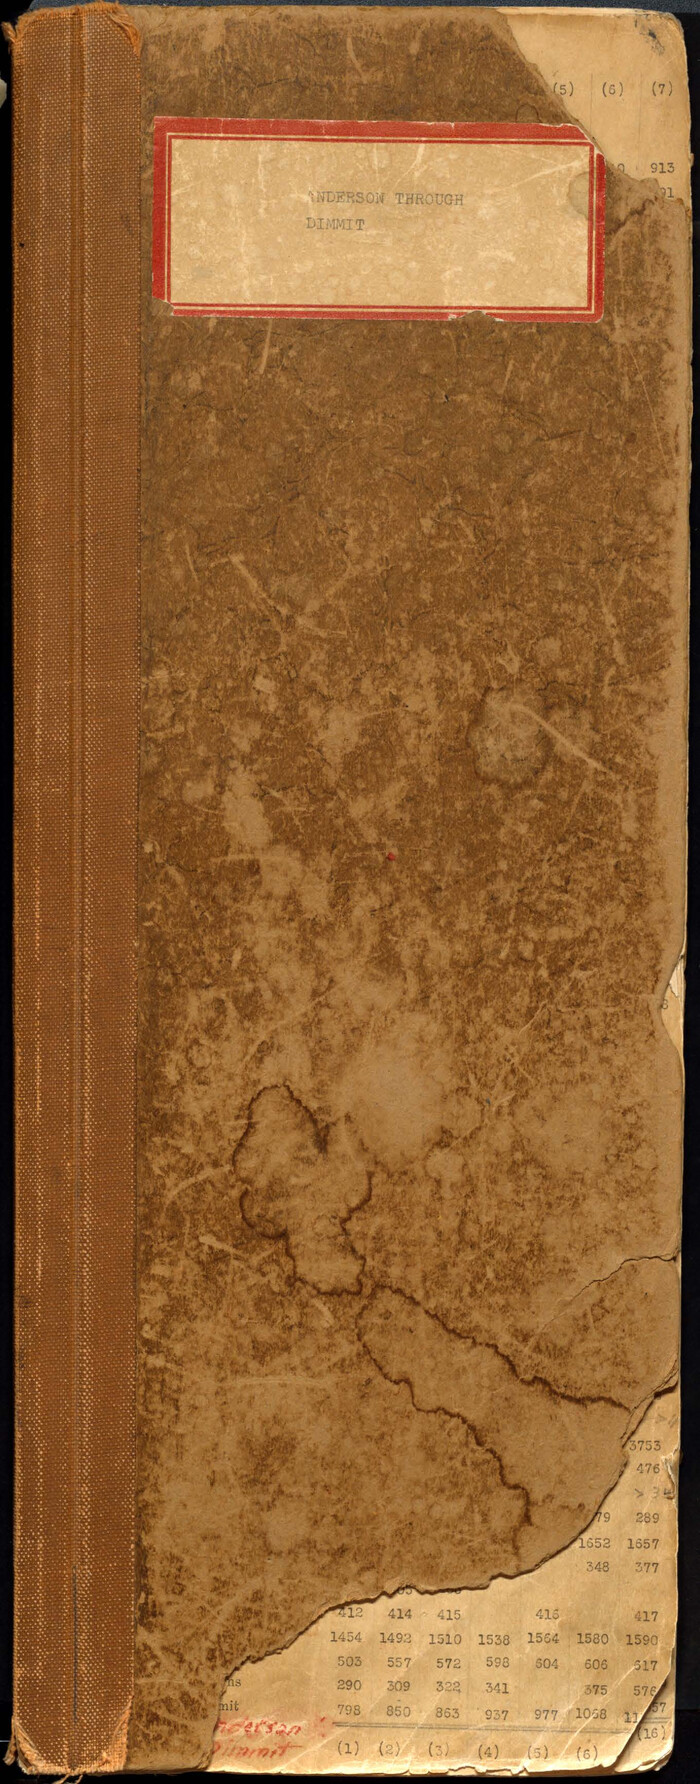 82965, [Abstract Numbering Register - Anderson through Dimmit], General Map Collection